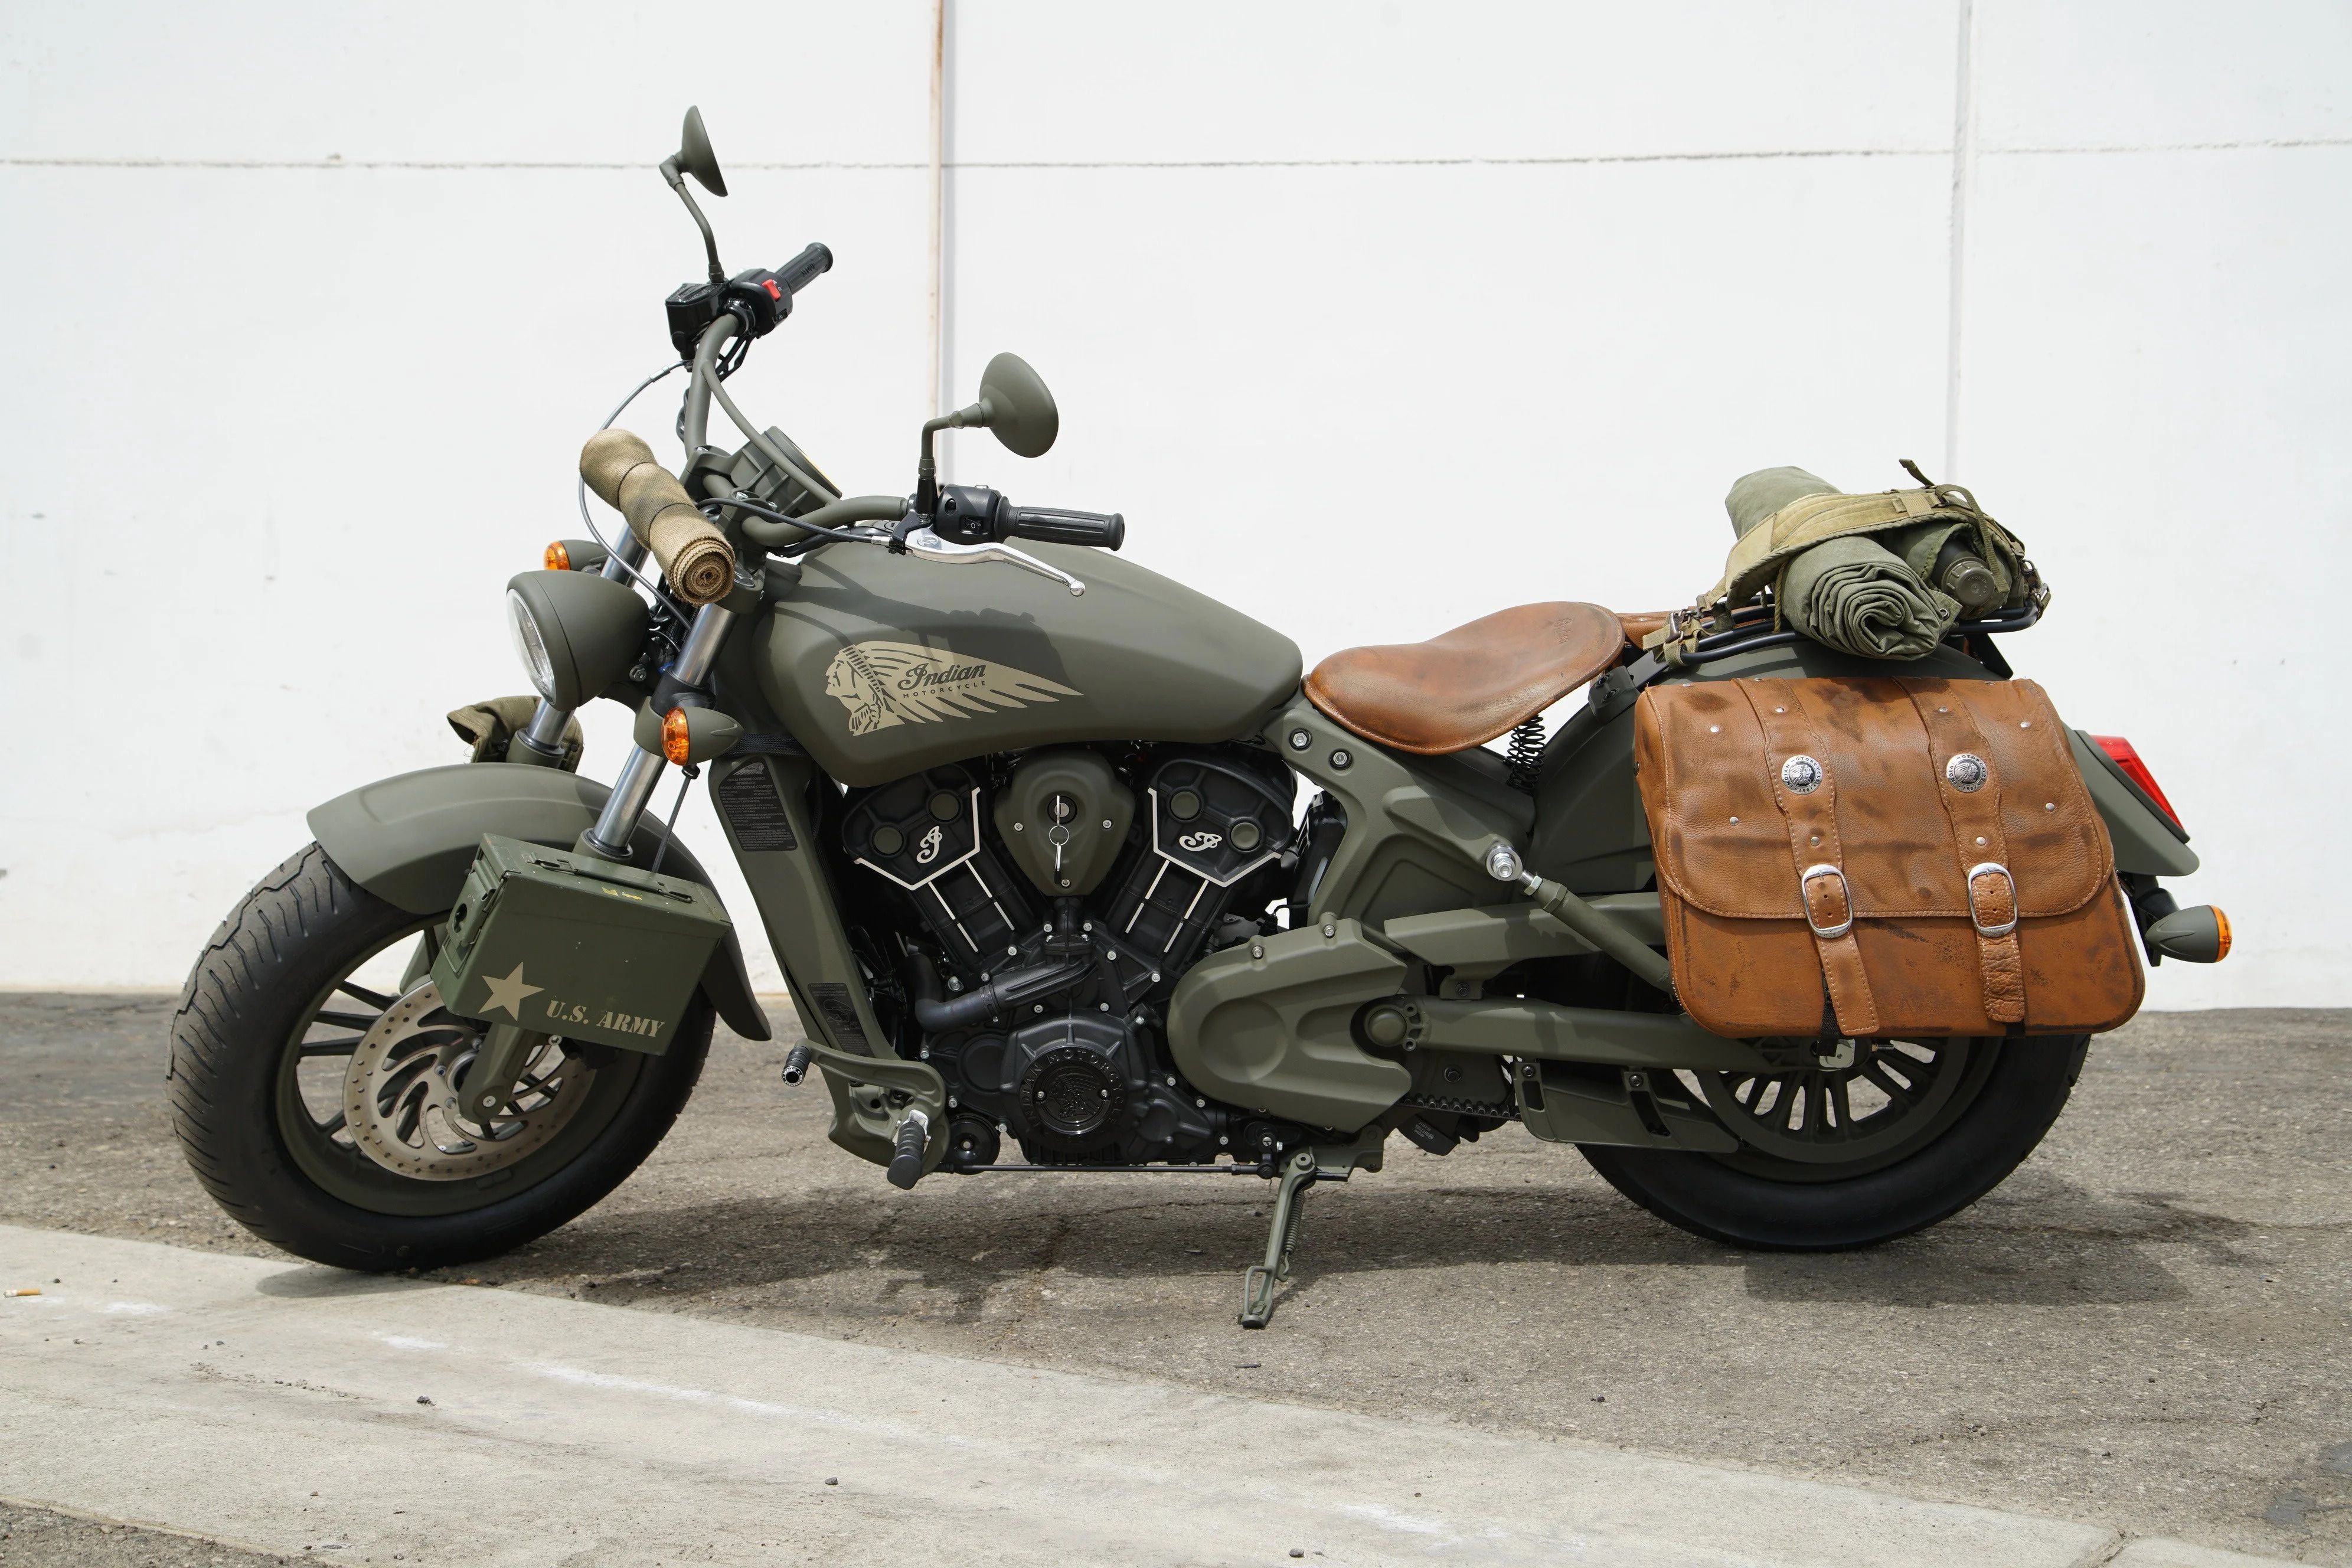 WWII themed Indian Motorcycle with leather saddlebags